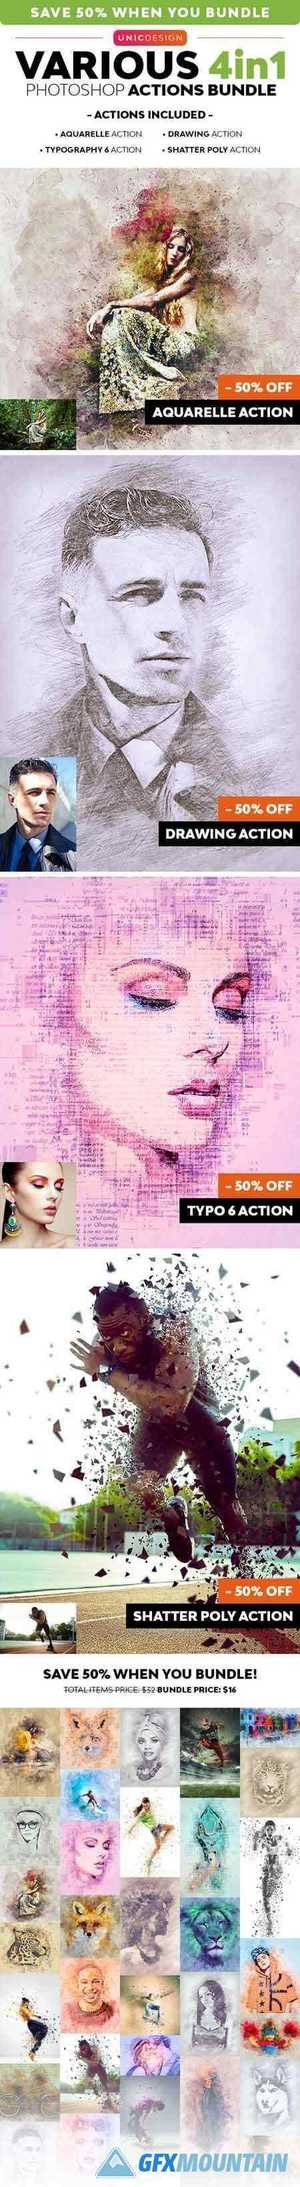 Various 4in1 Photoshop Actions Bundle 26390058